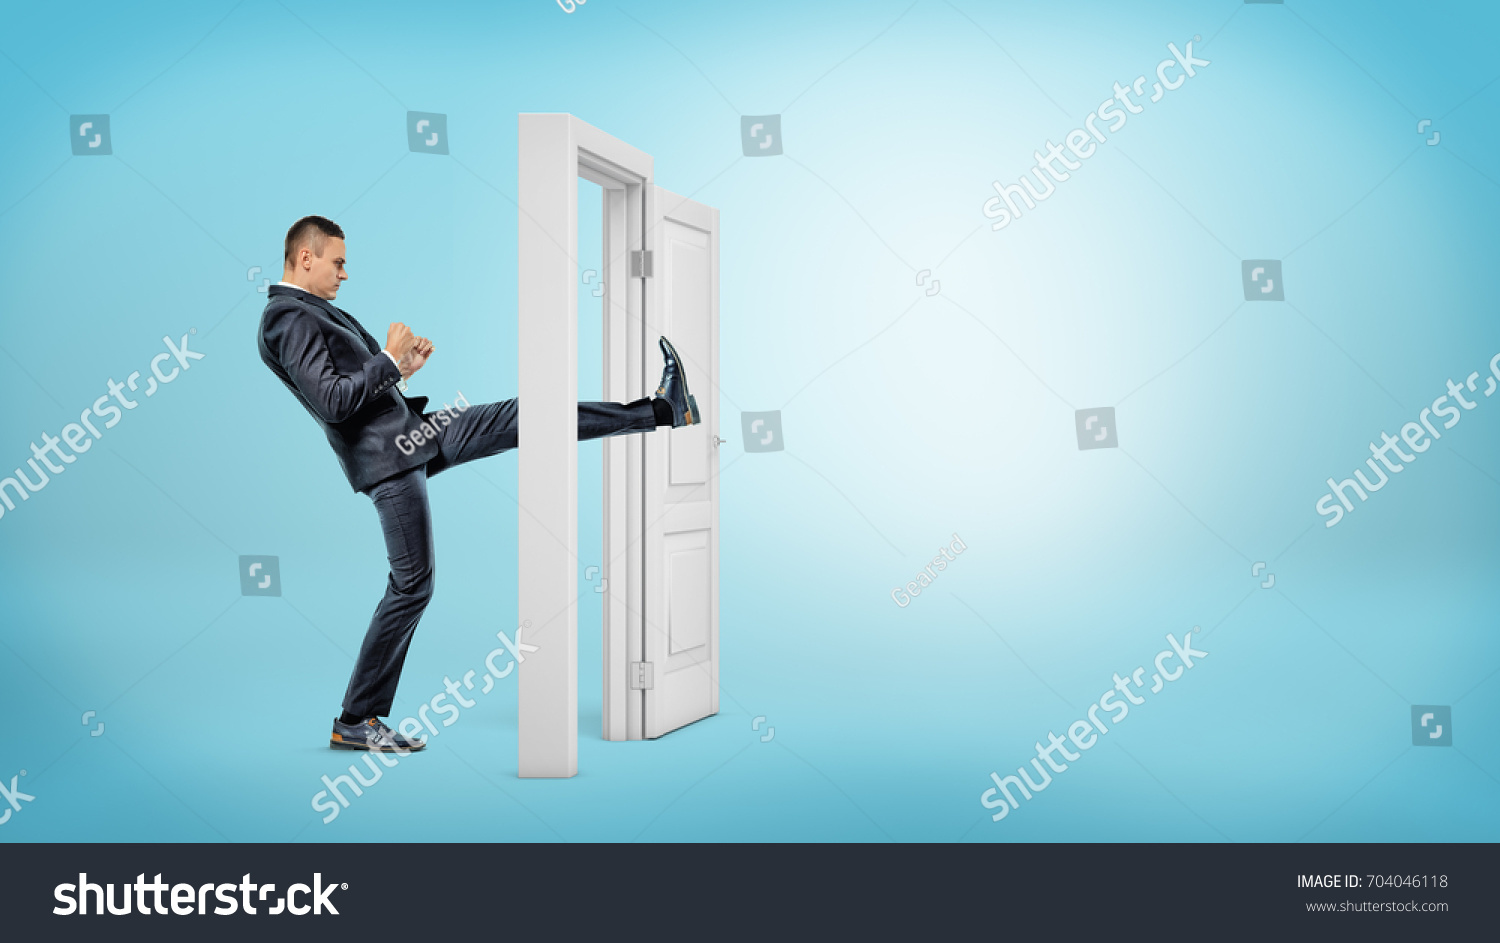 A businessman in side view kicks a small white door open with his leg on blue backgrounds. Business and success. Opening all doors. Aggressive business approach. #704046118